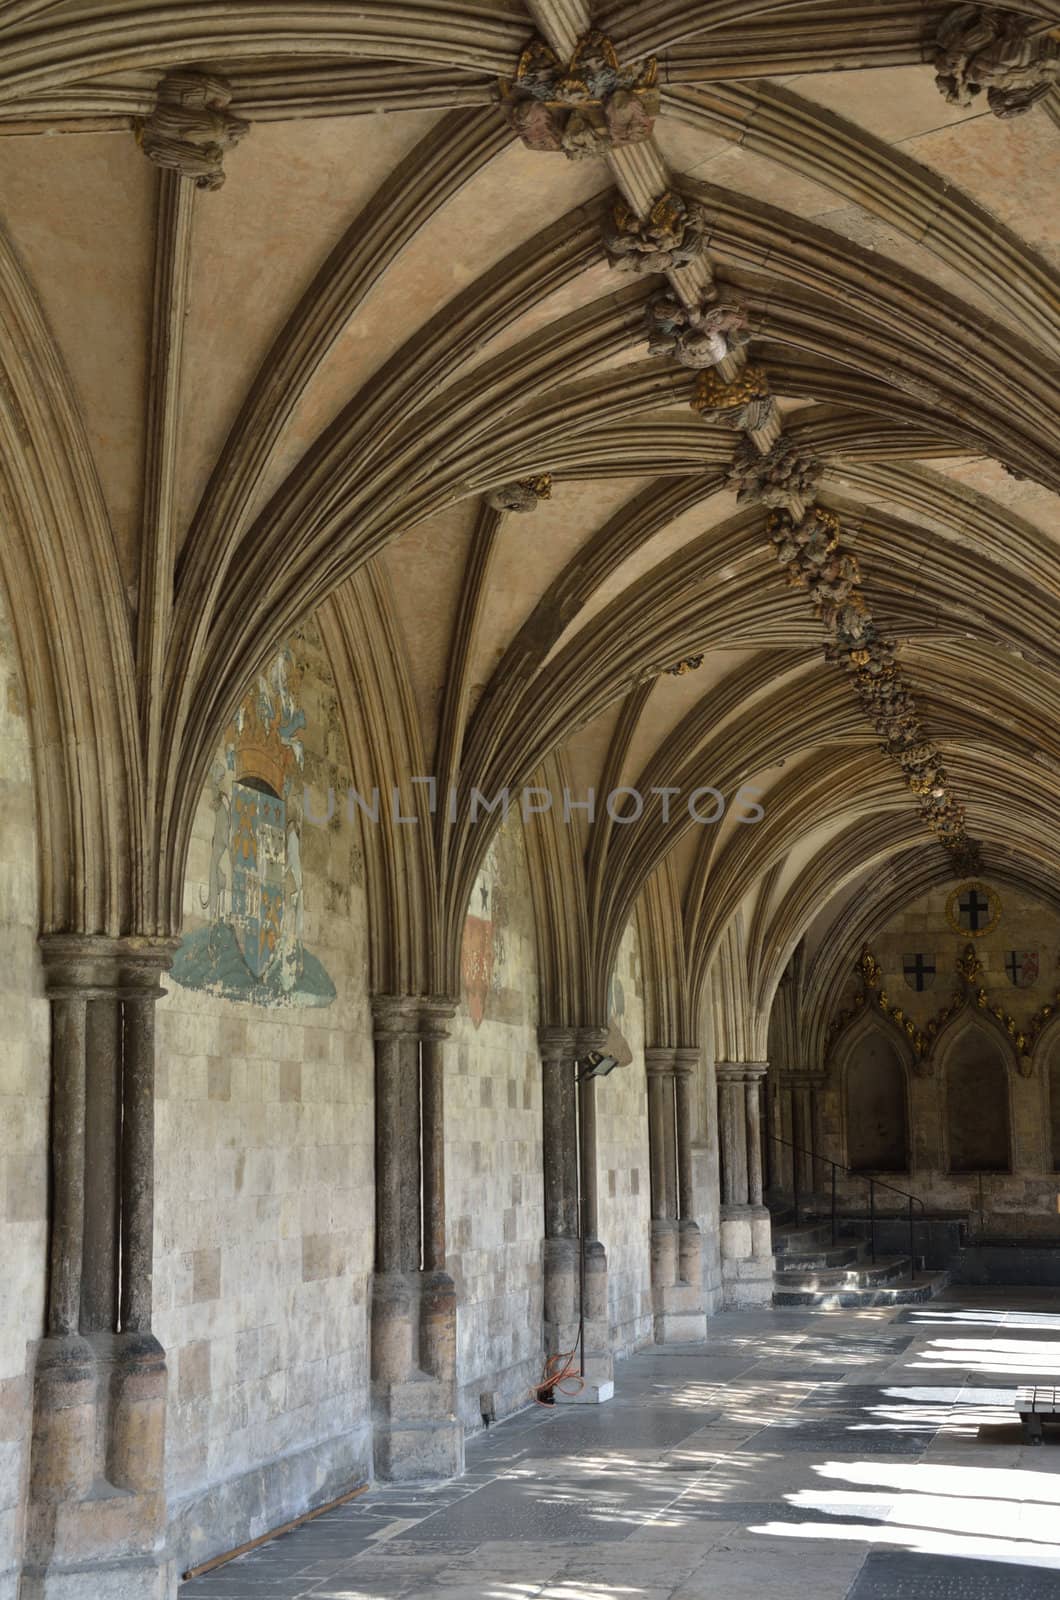 Cloisters by pauws99